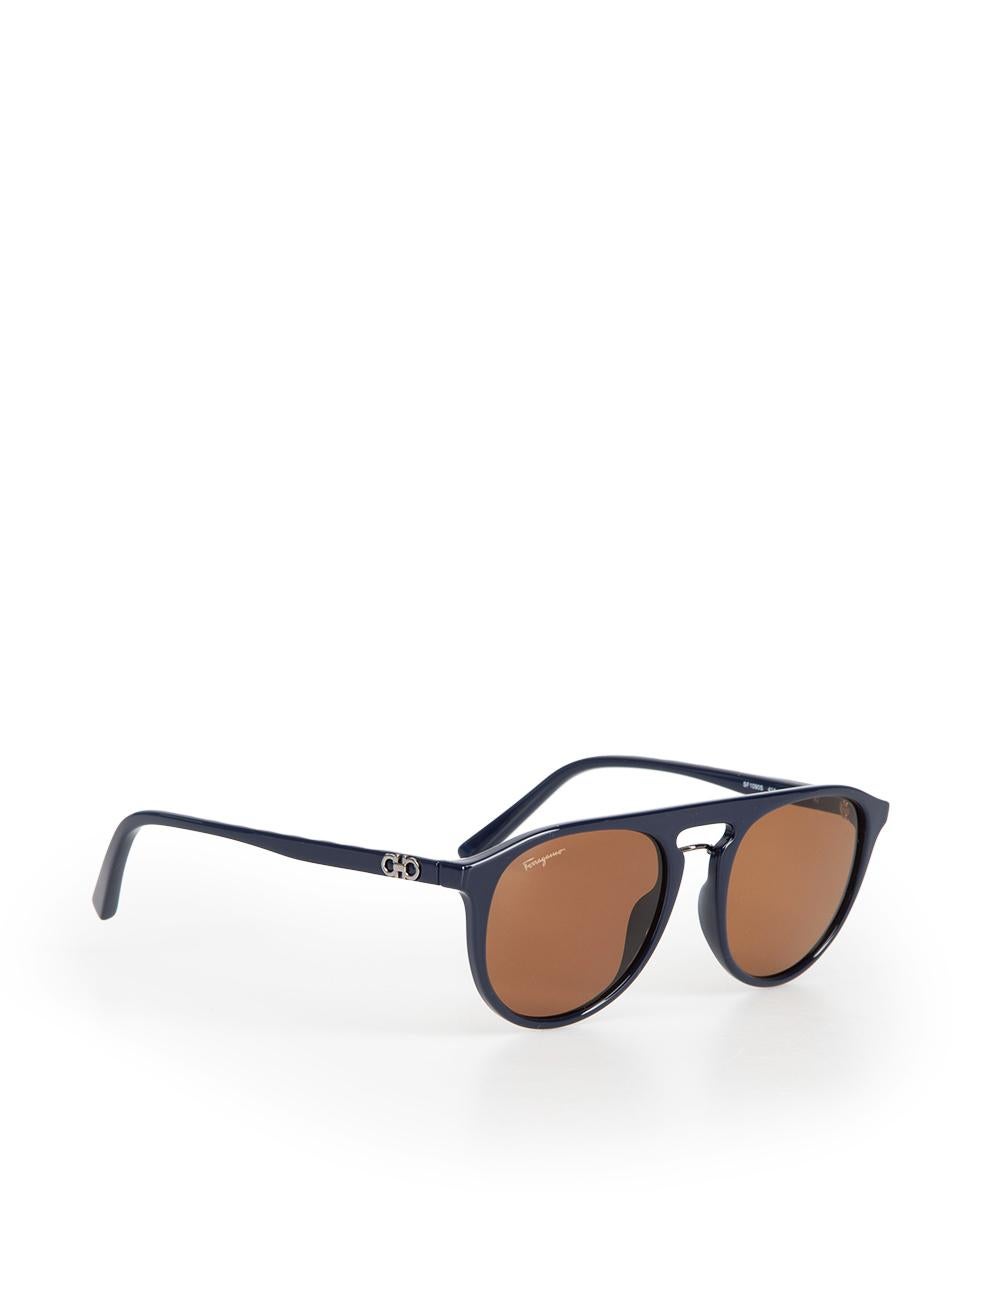 CONDITION is New with tags on this brand new Salvatore Ferragamodesigner item. This item comes with original packaging.
 
 
 
 Details
 
 
 Model: SF1090S
 
 Blue
 
 Acetate
 
 Aviator Sunglasses
 
 Amber Tinted Lens
 
 Full-Rim
 
 100% UV